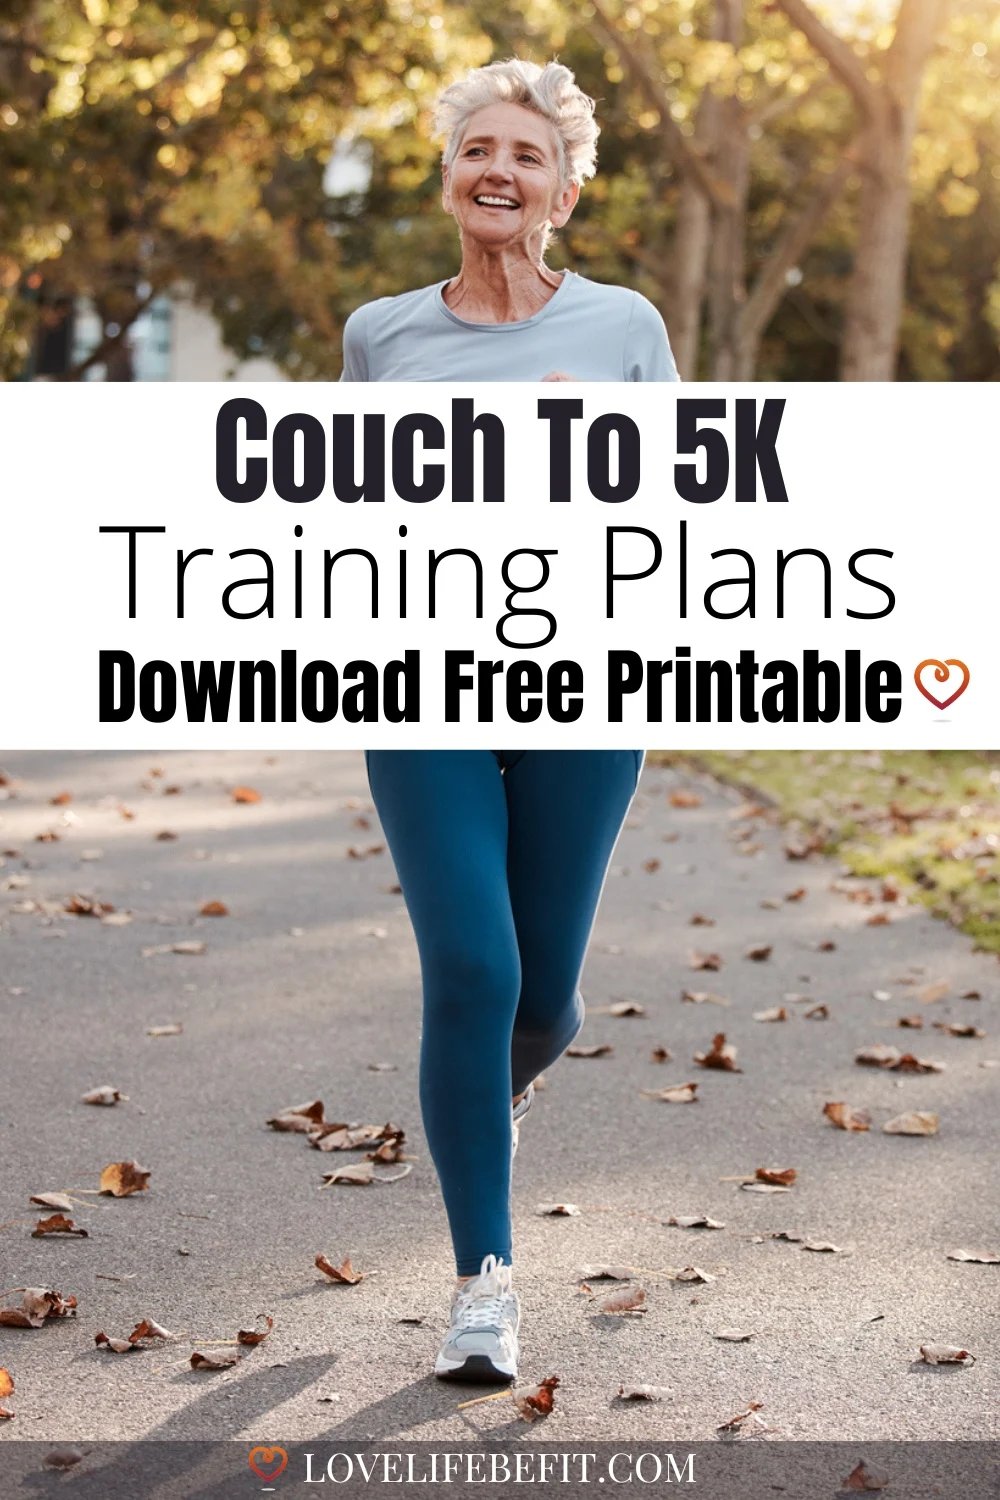 Couch To 5K Training Plans Free Printable